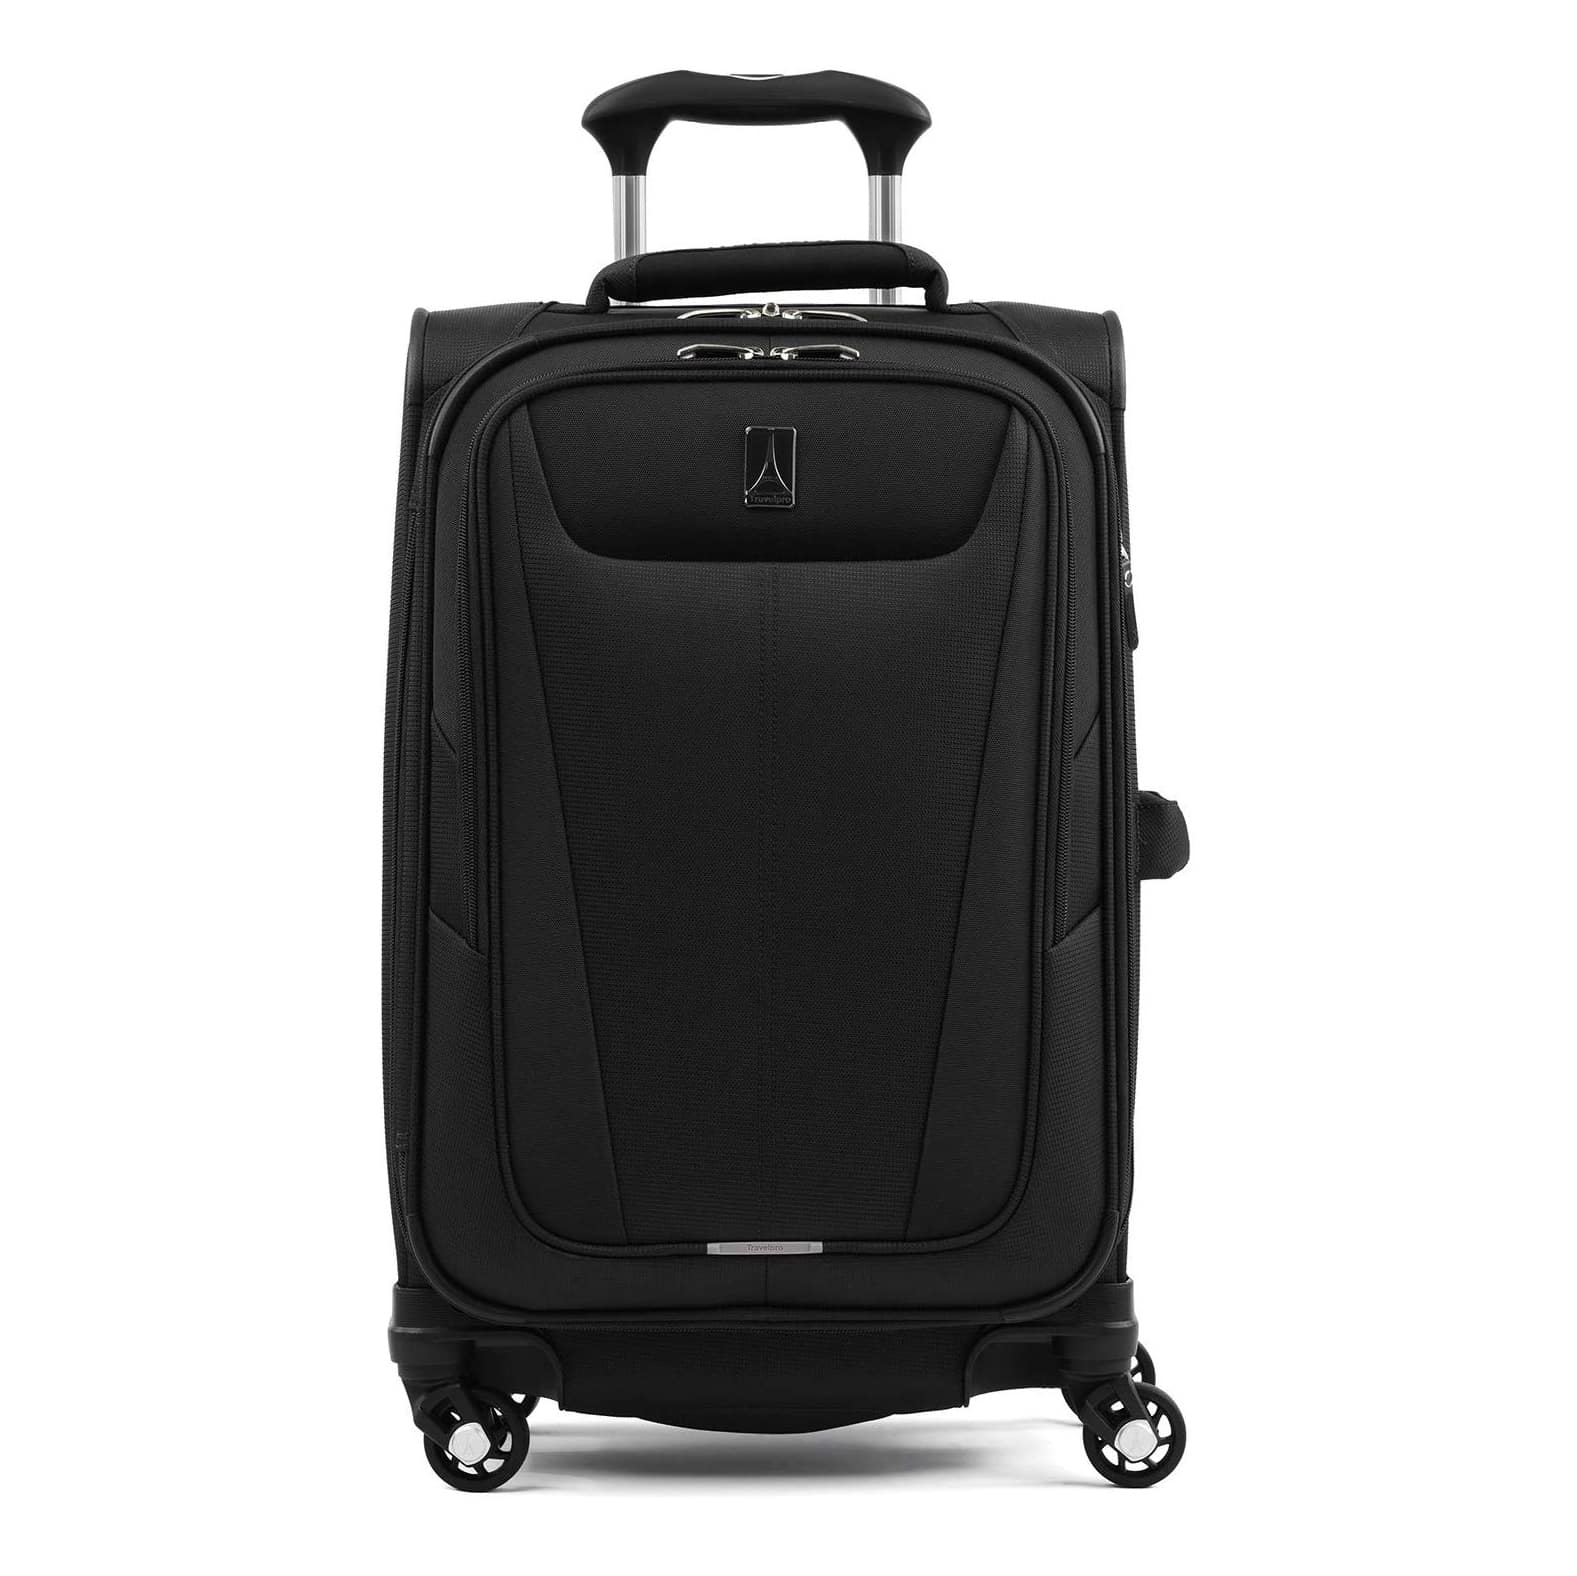 Top 10 Best Carry on Luggage Travel Suitcases in 2023 Reviews